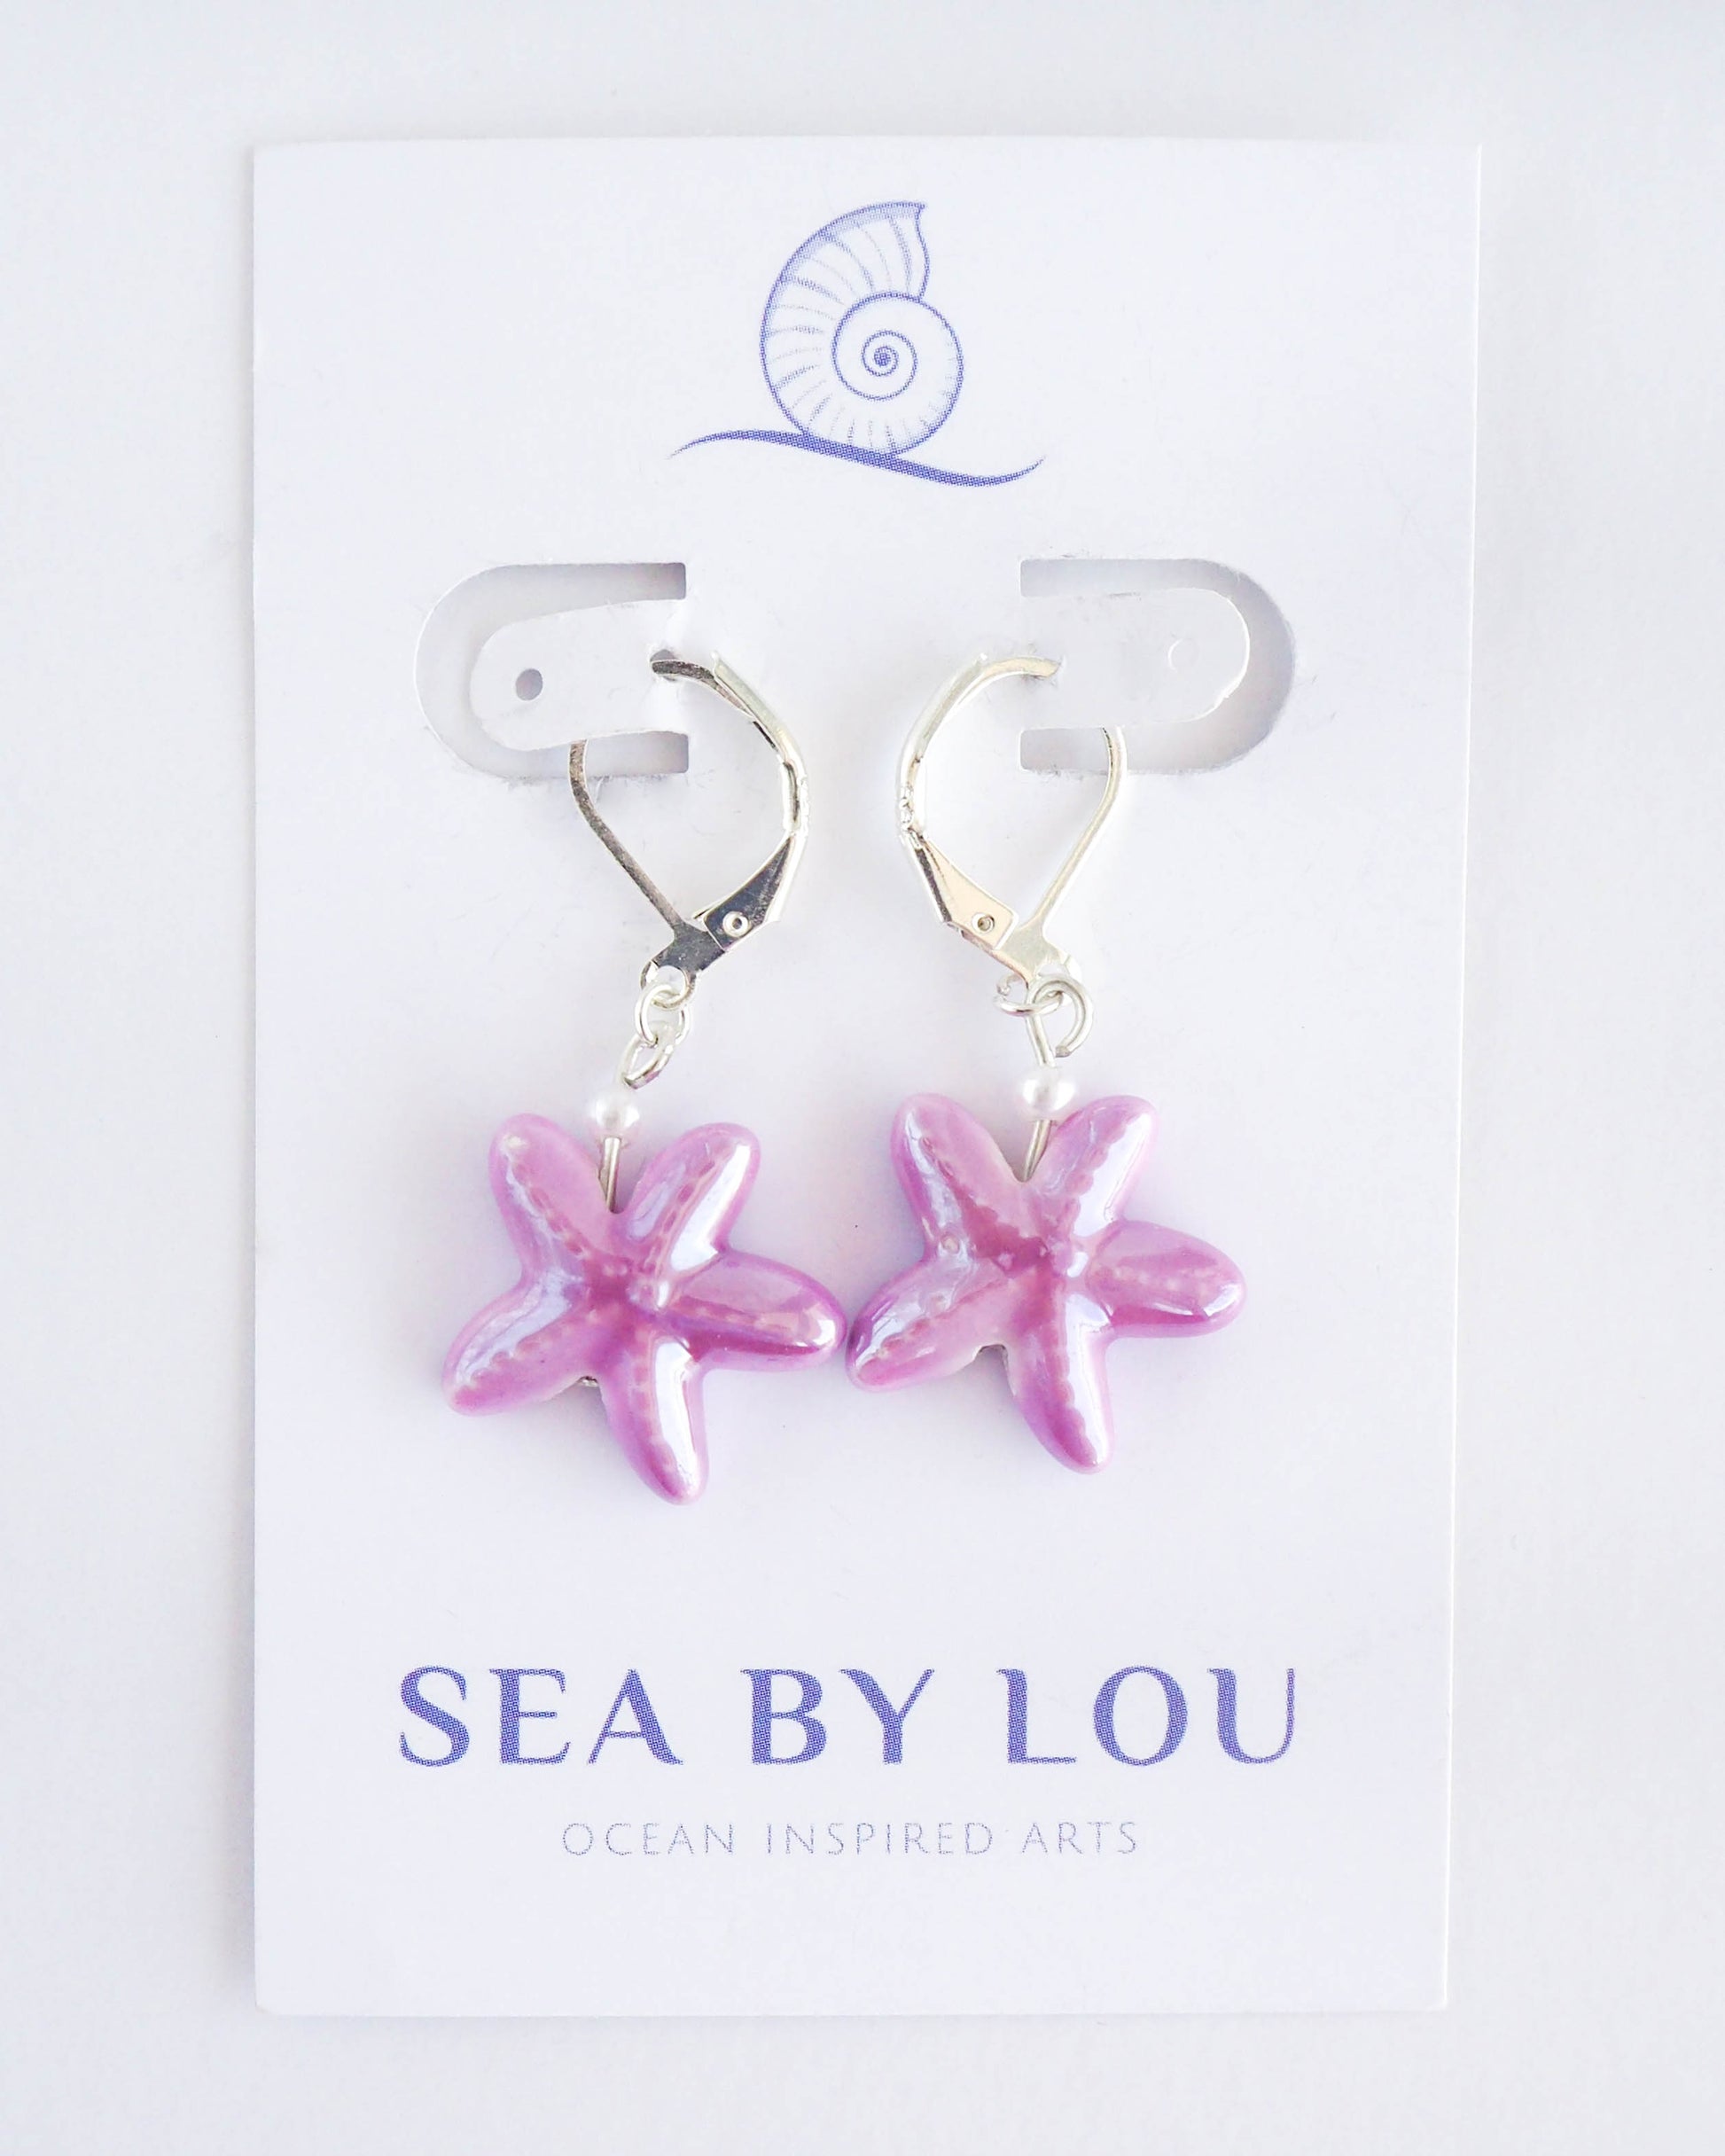 Lilac Starfish earrings - Ceramice Sea Stars from portugal - 925 sterling silver